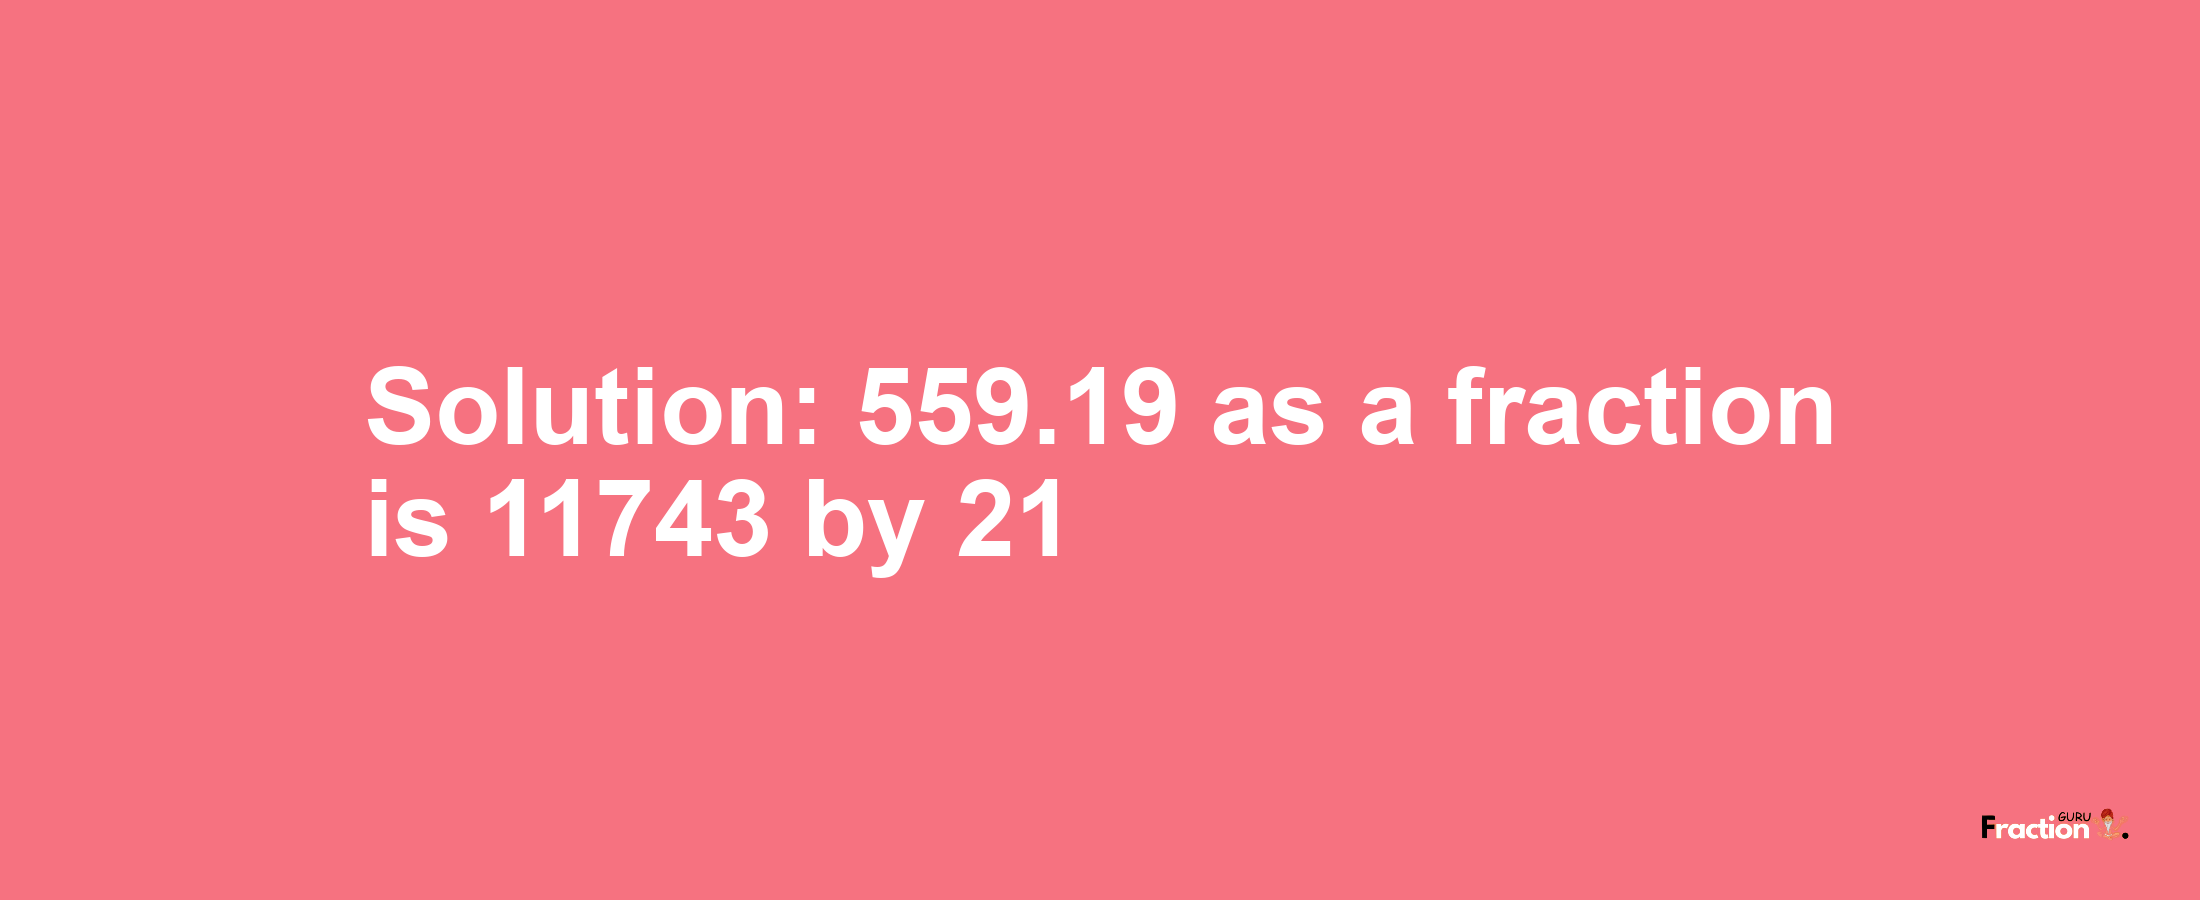 Solution:559.19 as a fraction is 11743/21